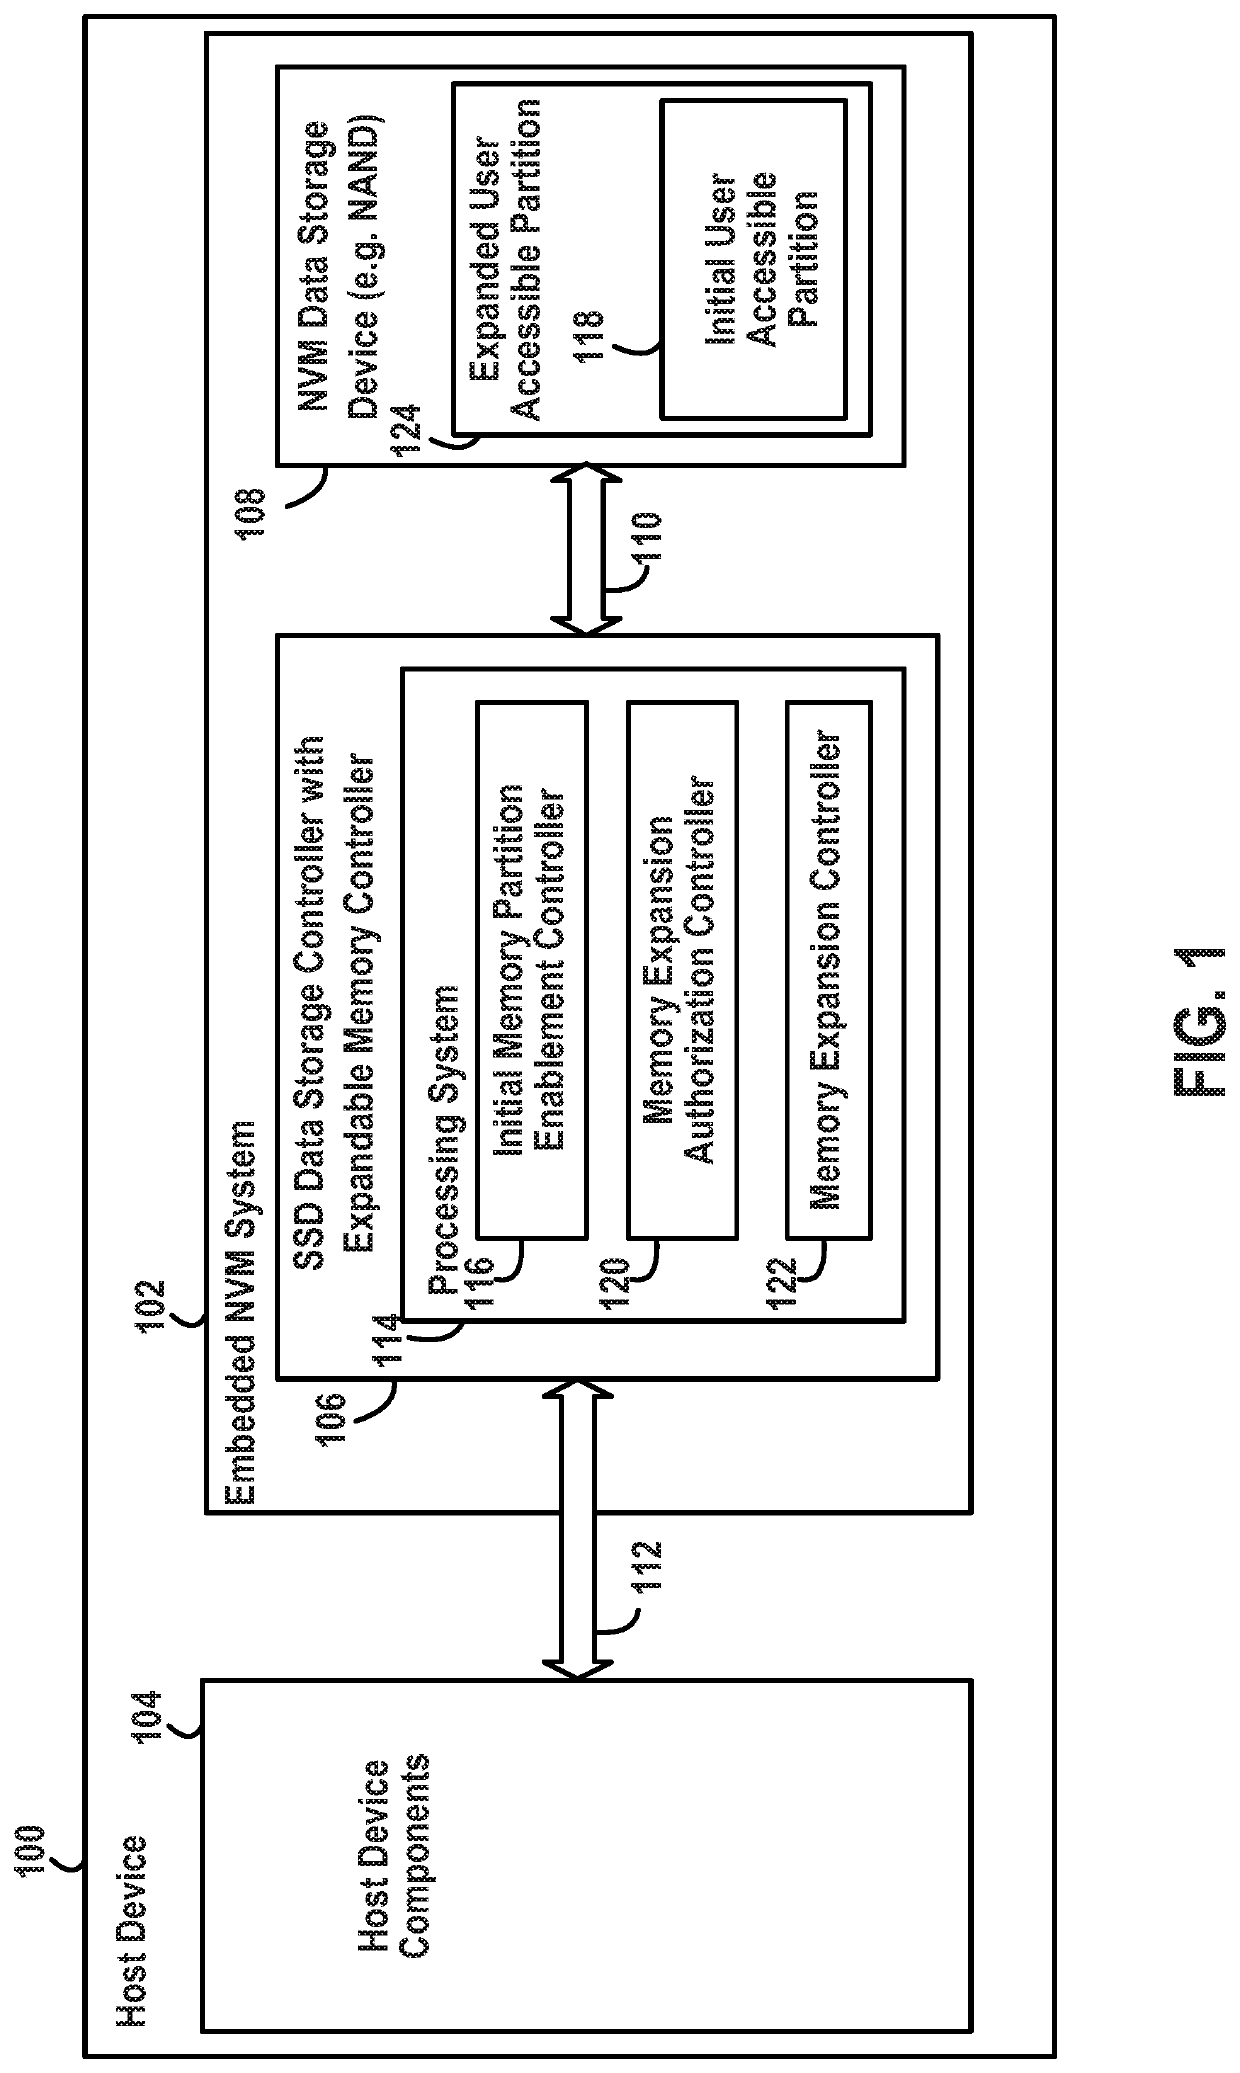 Expandable memory for use with solid state systems and devices